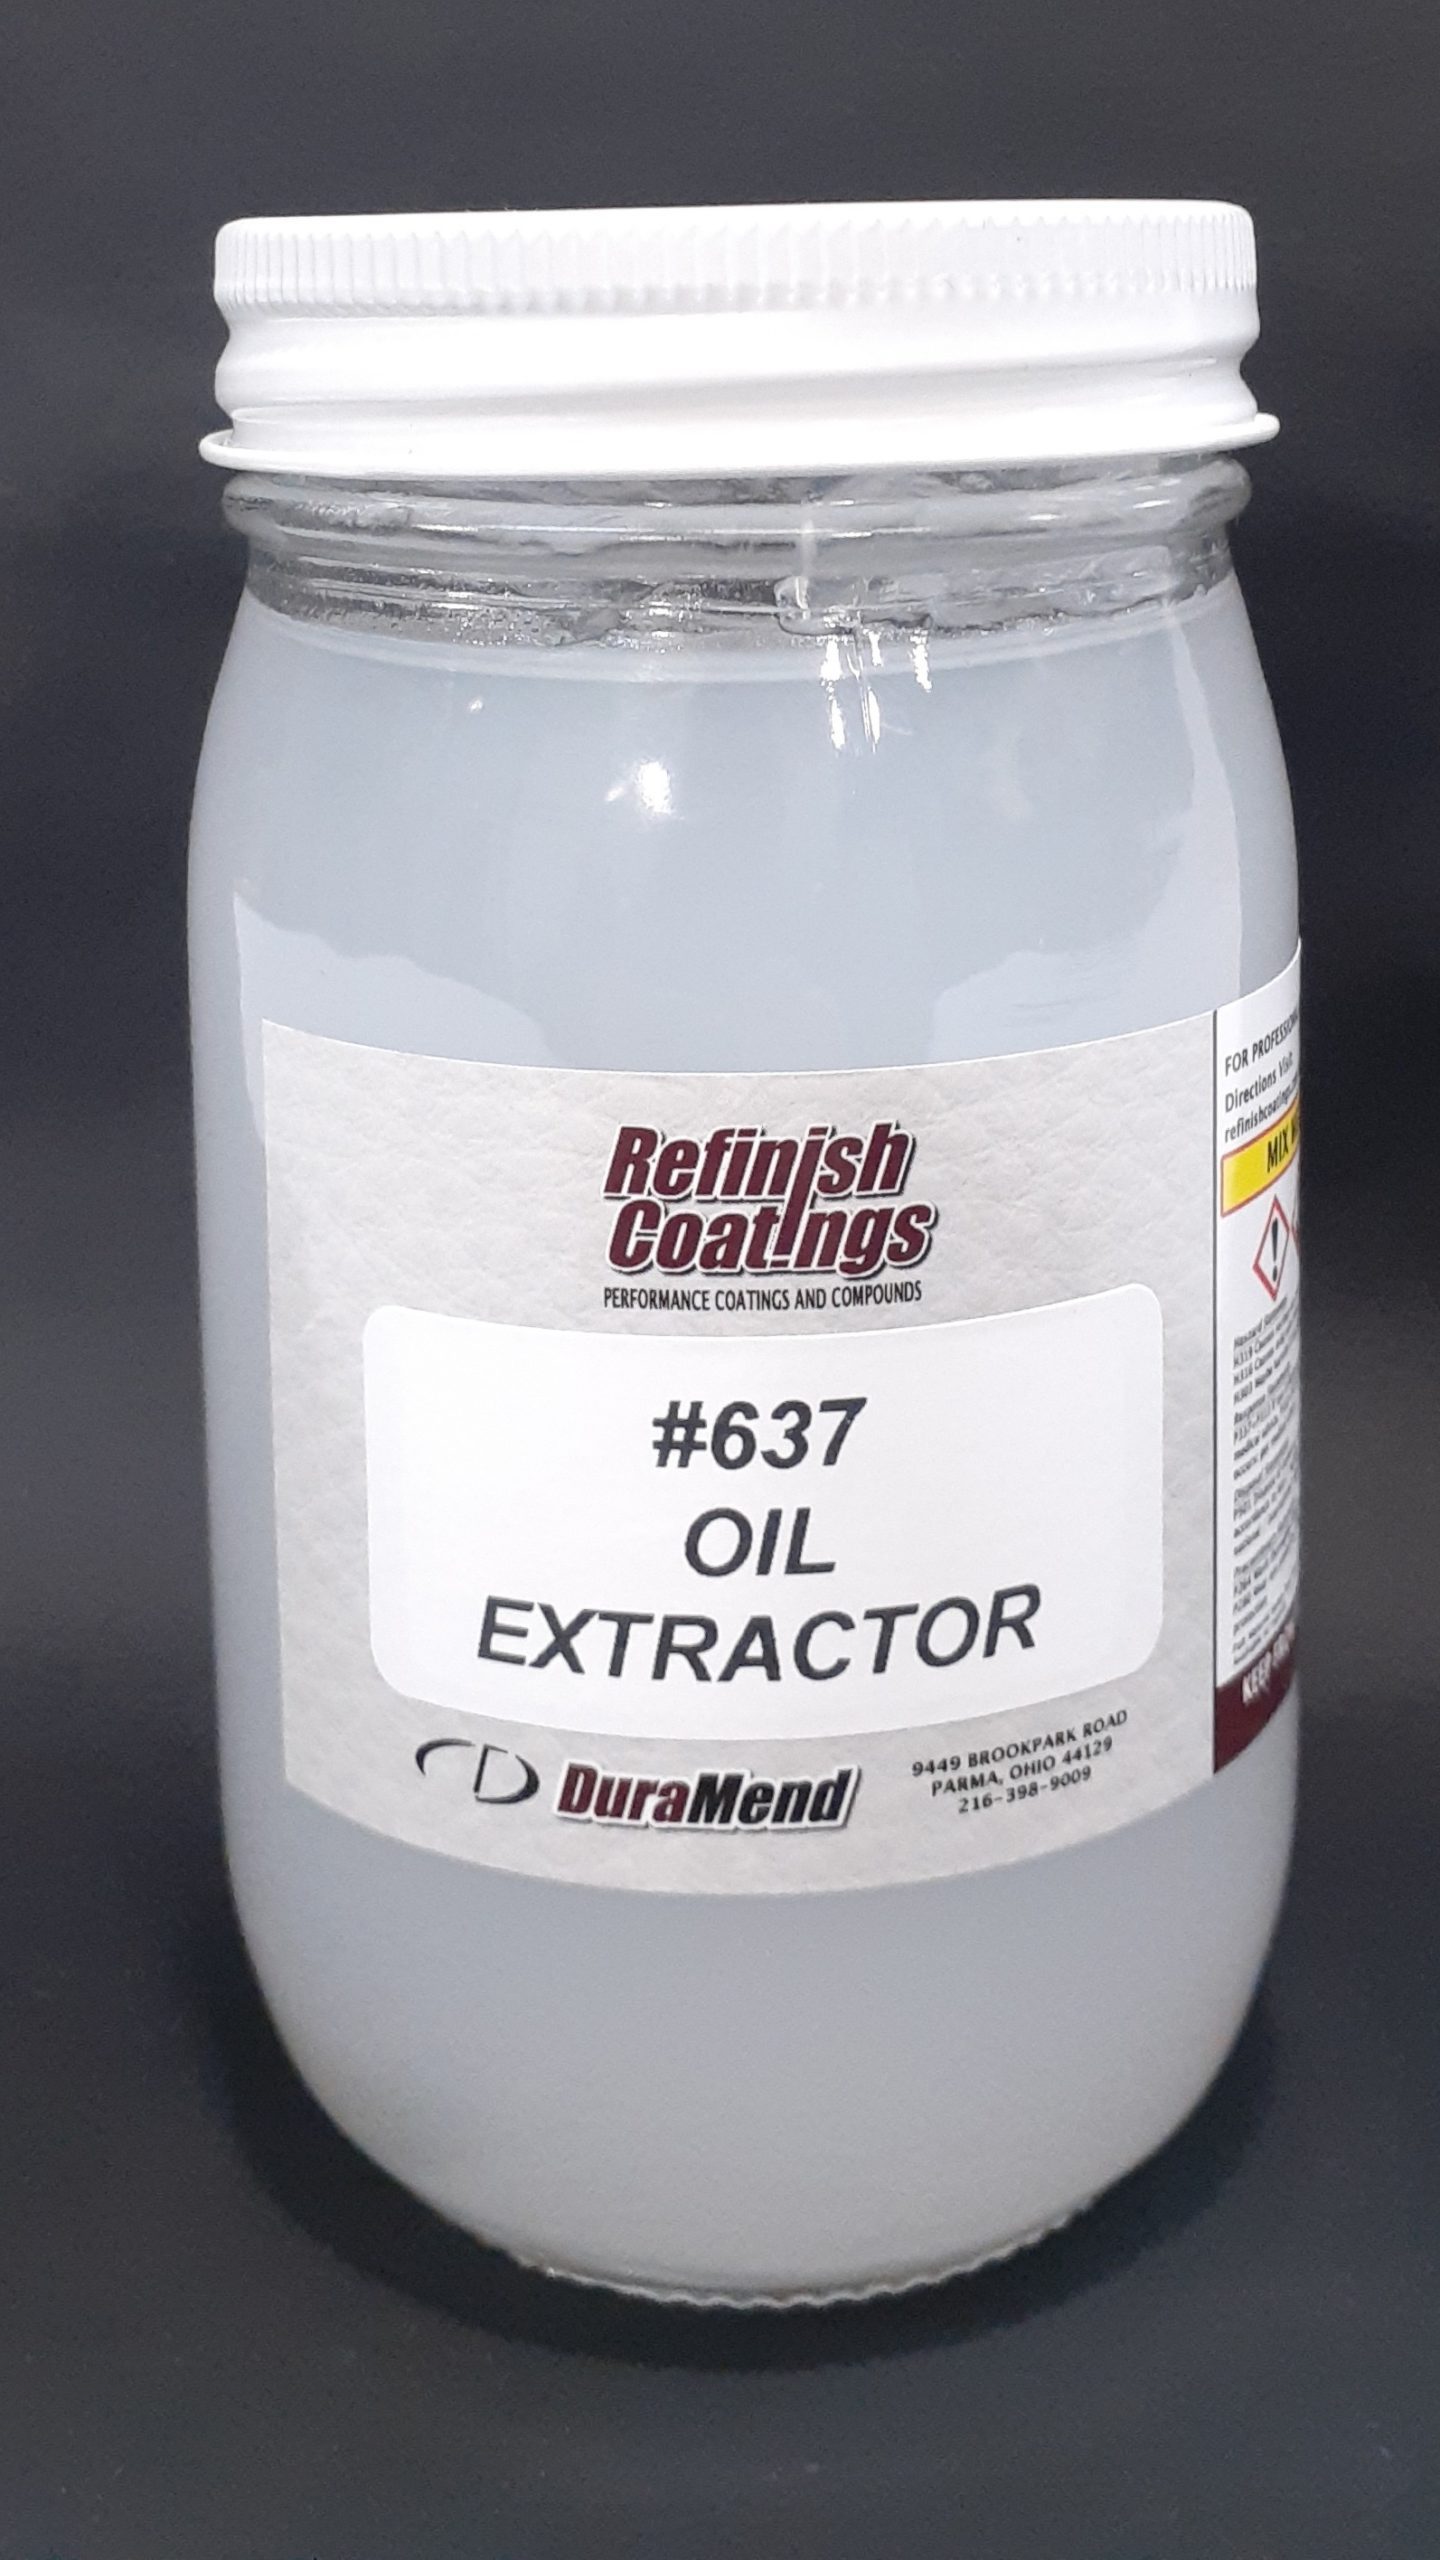 Oil Extractor - PERFORMANCE COATINGS AND COMPOUNDS